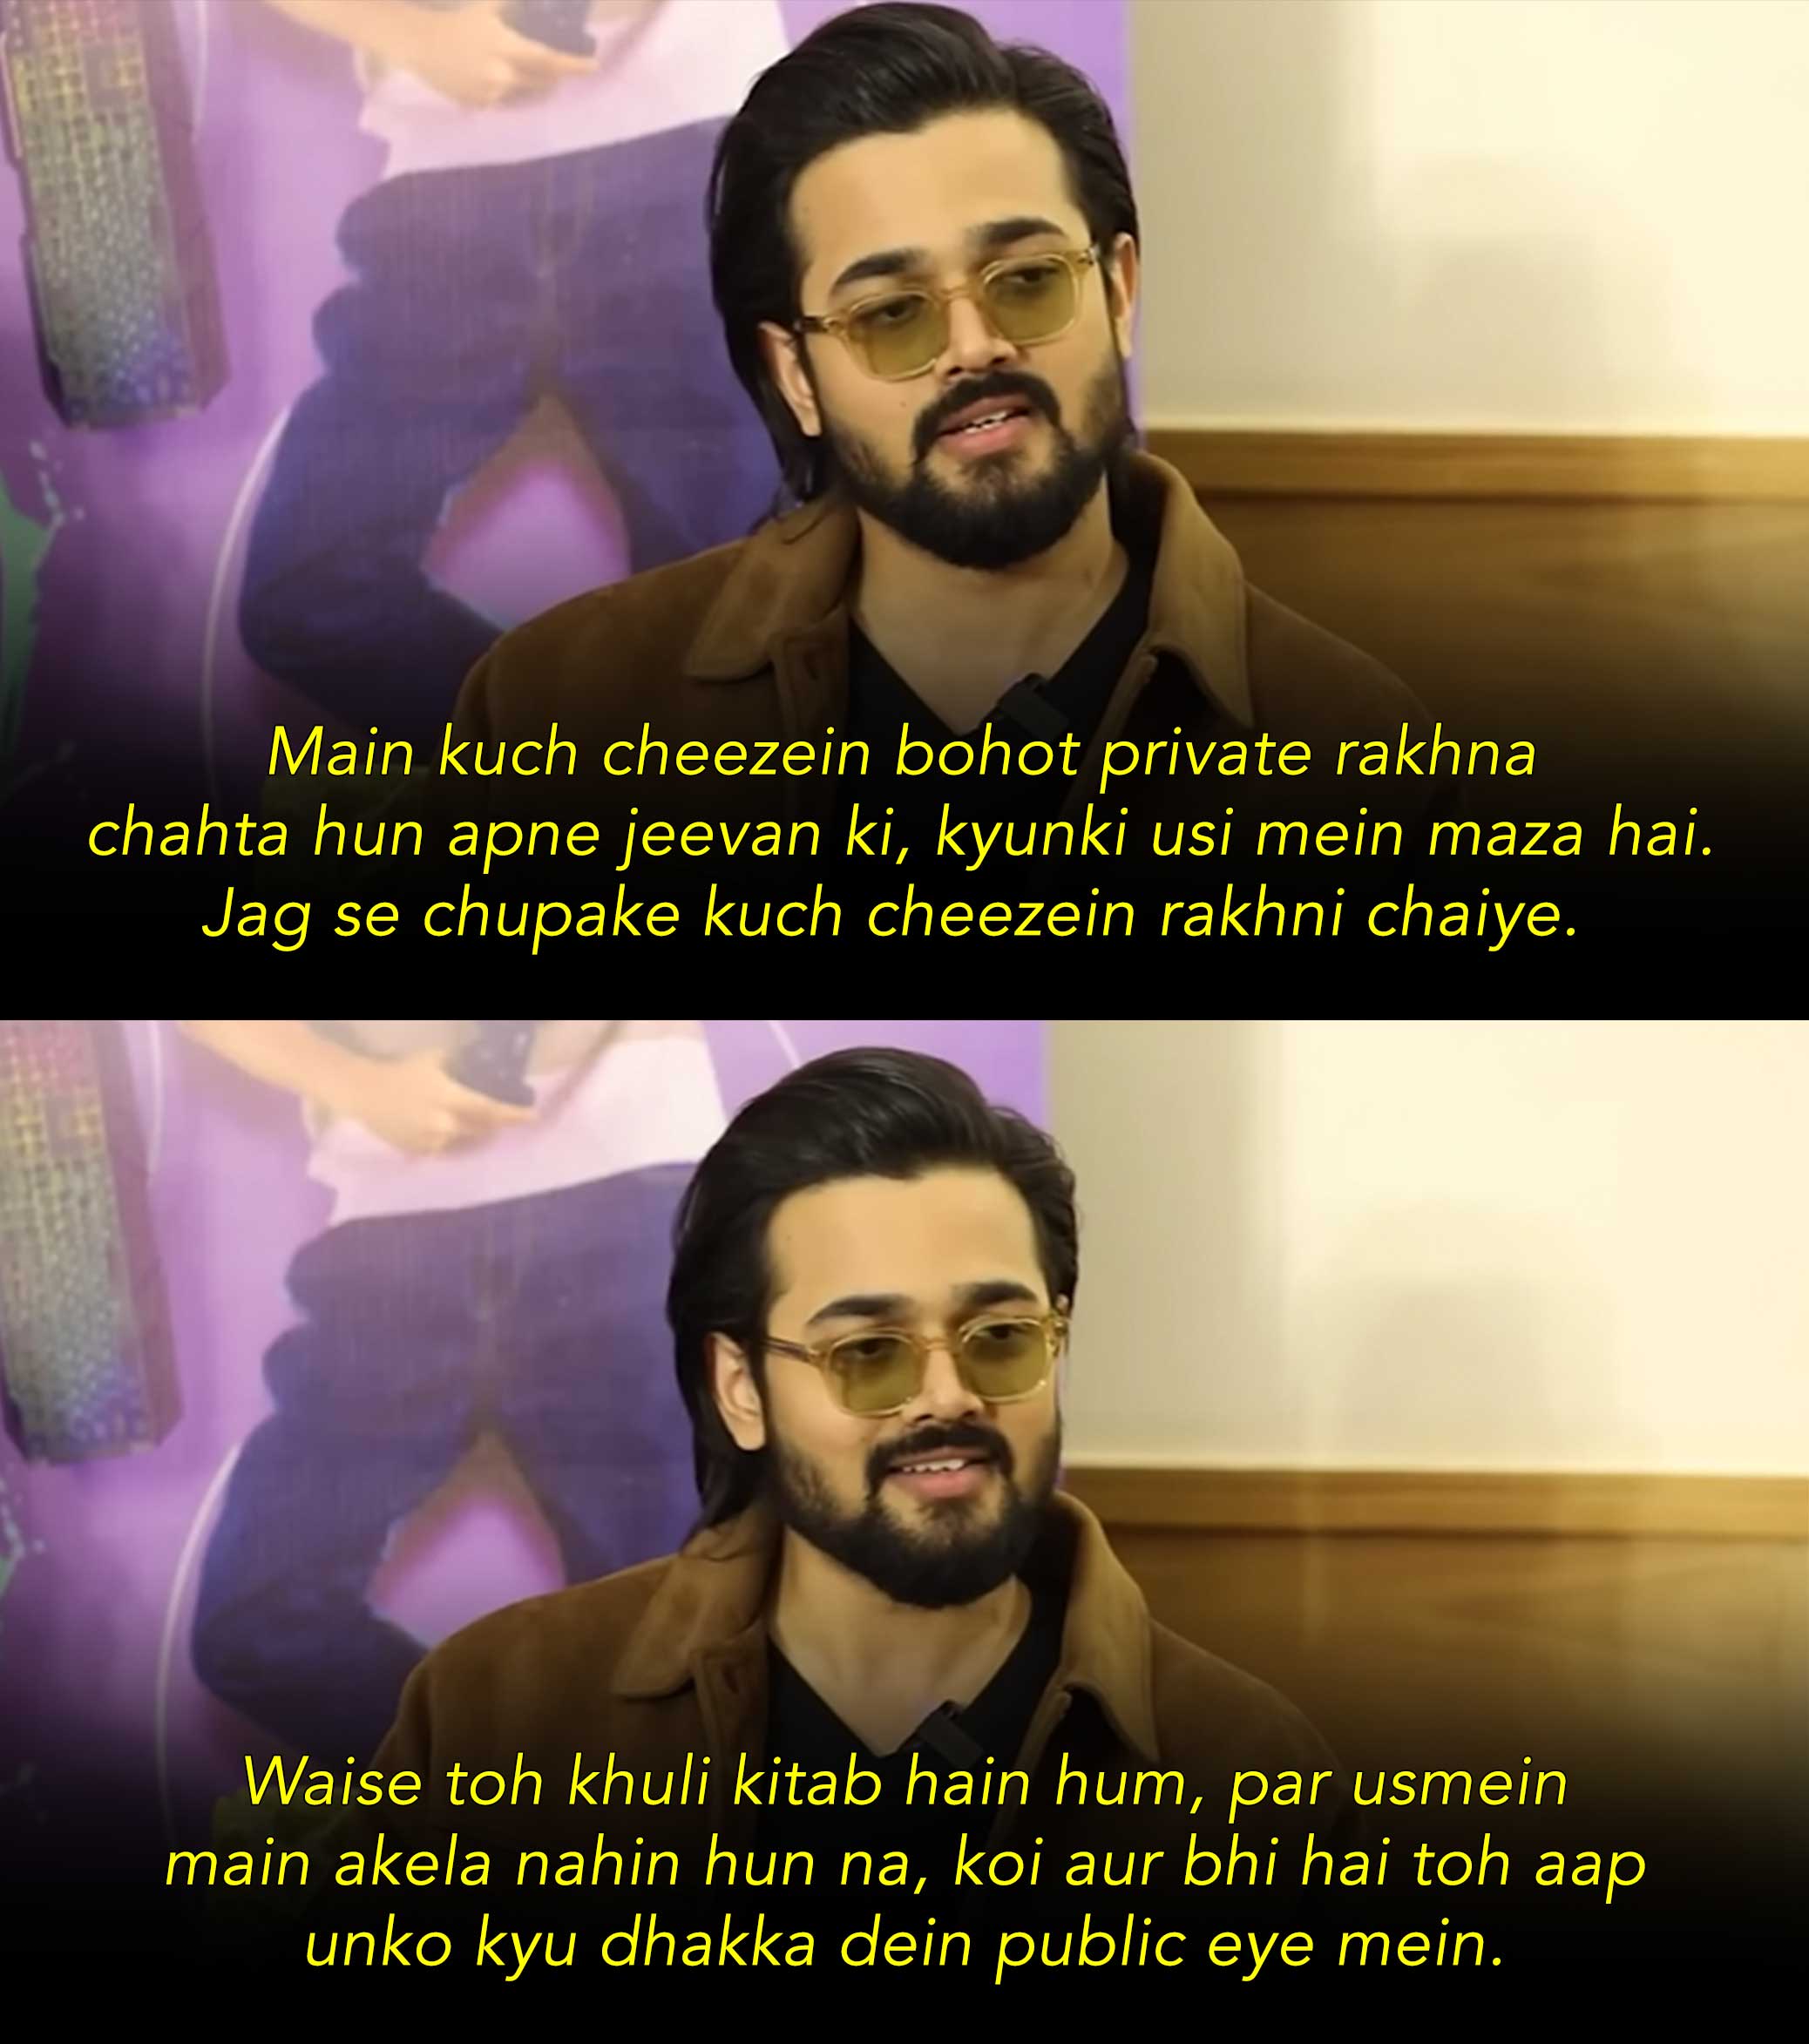 Bhuvan Bam on keeping dating life private